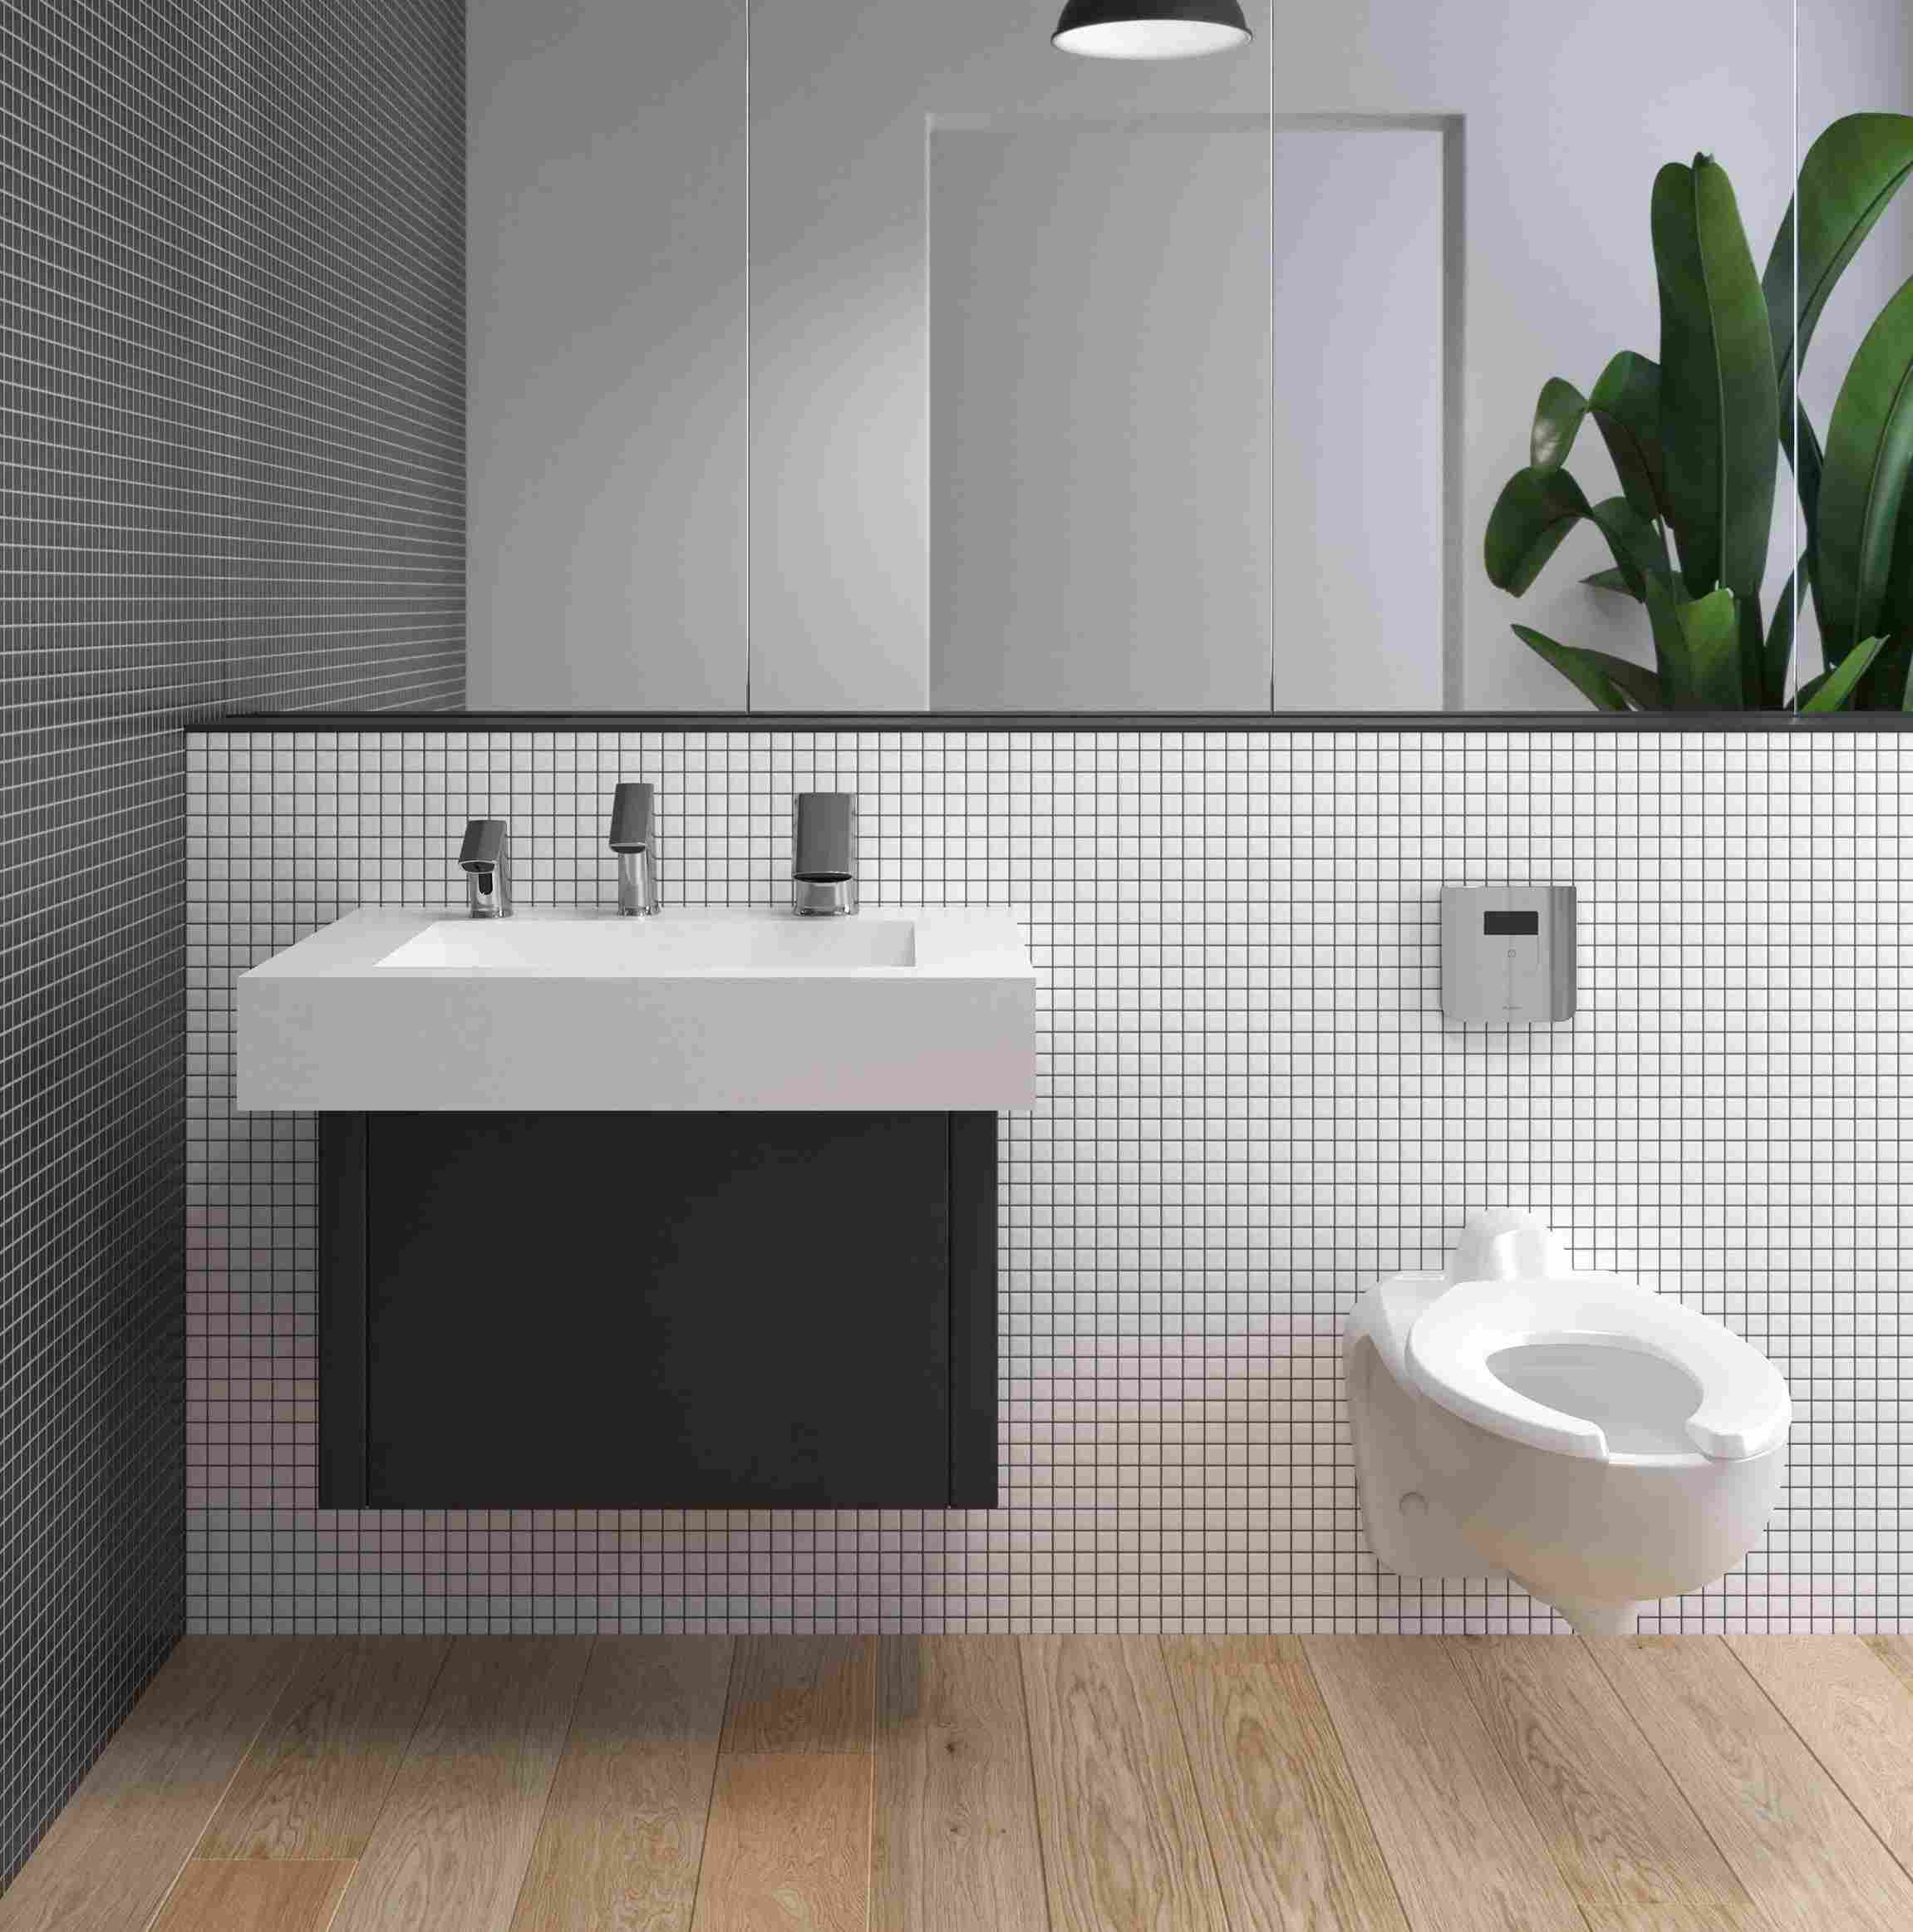 wash basin and water closet with water efficient bathroom fixtures and plumbing technology made by plumbing manufacturers- Sloan India